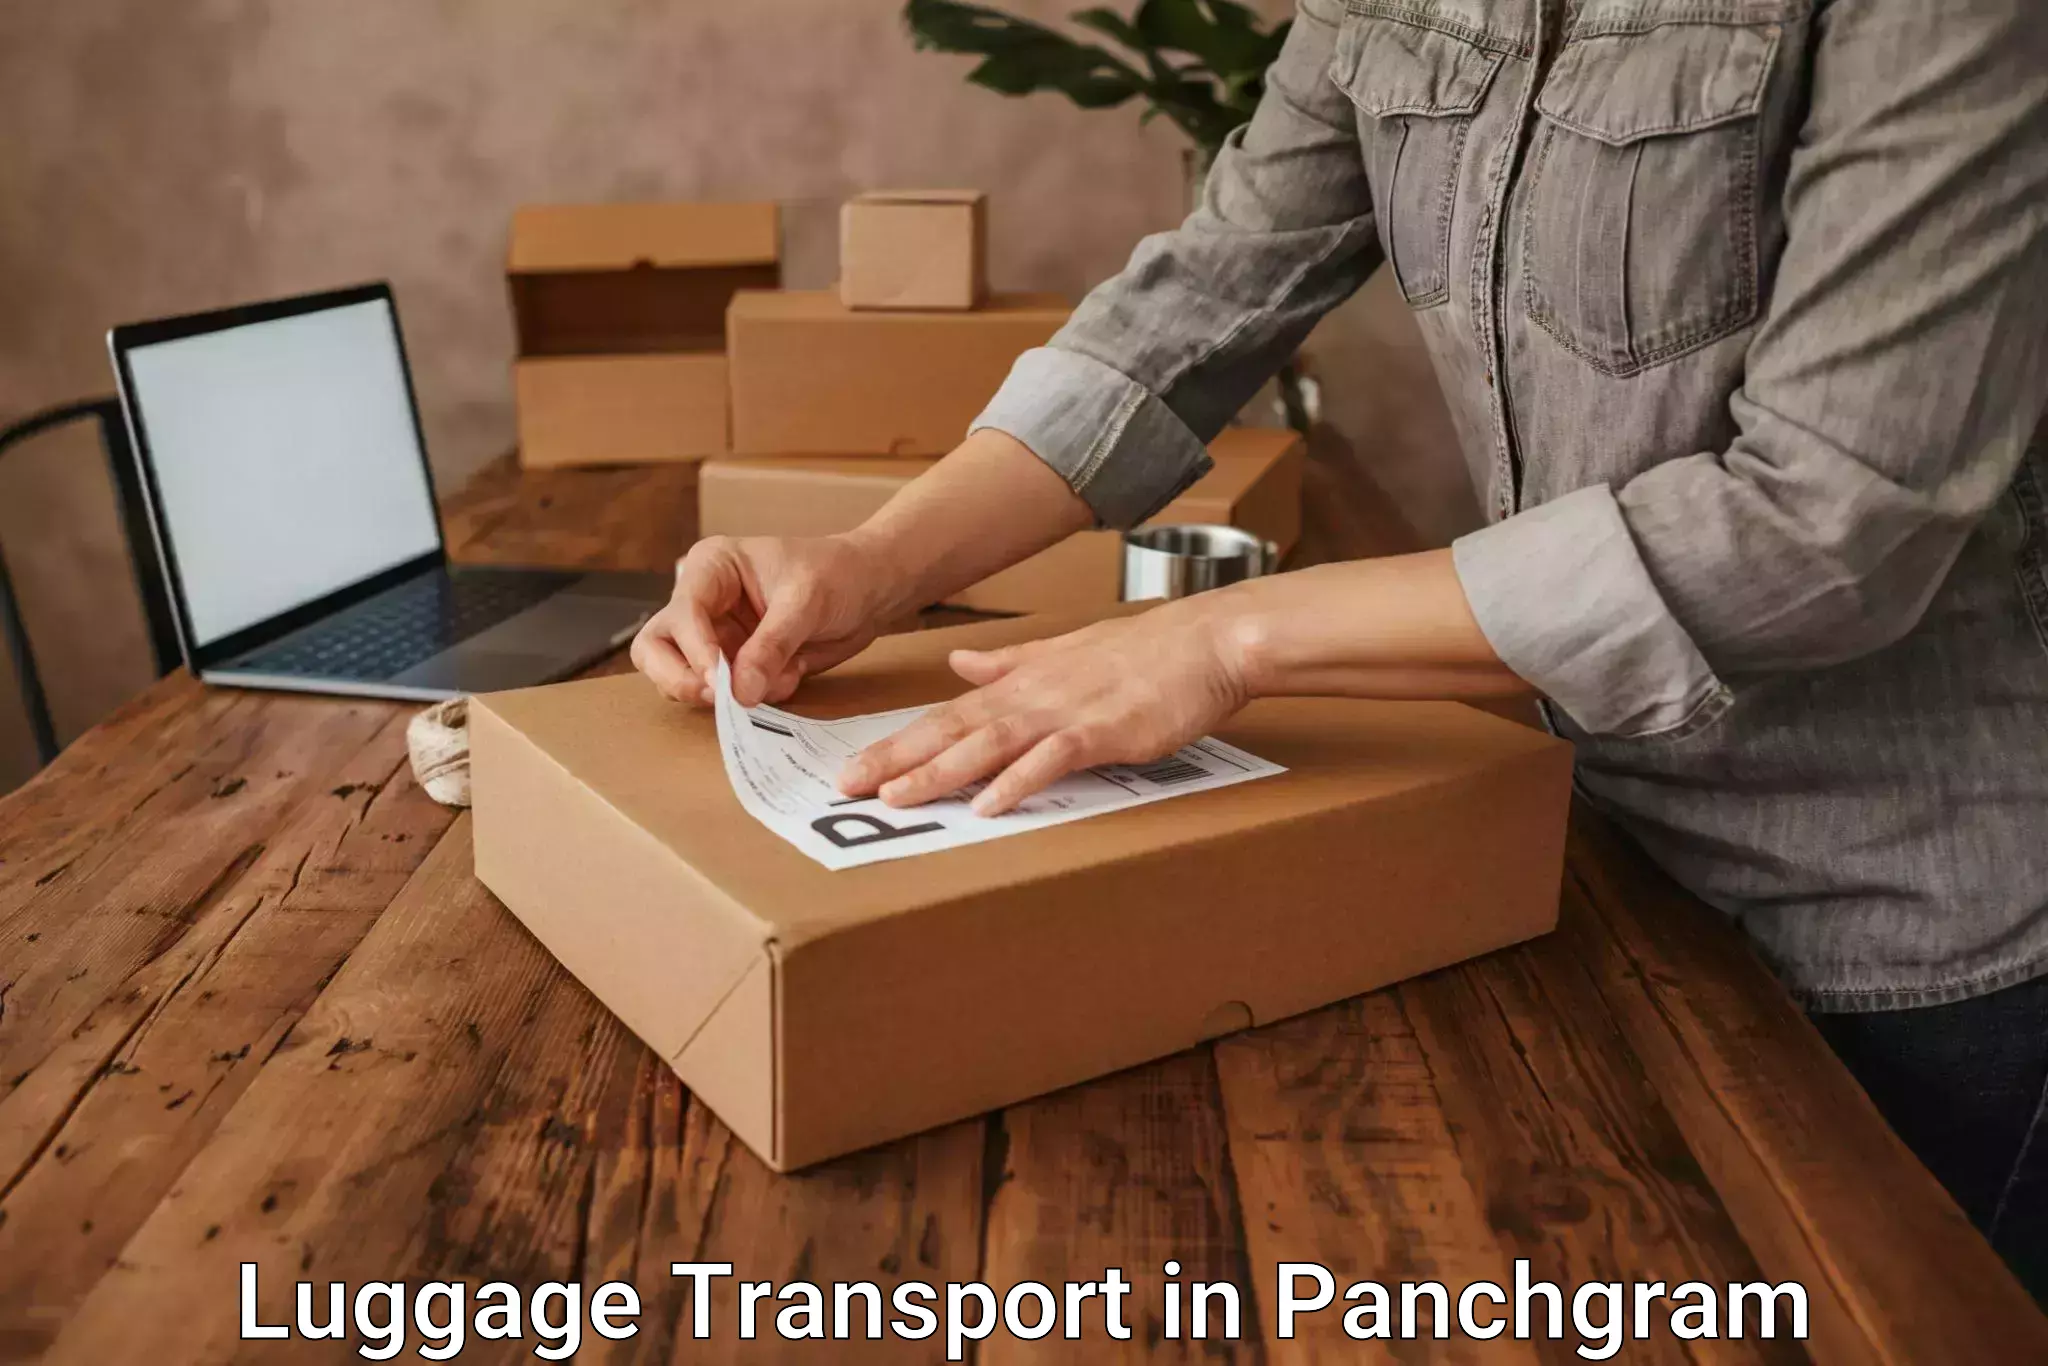 Automated luggage transport in Panchgram